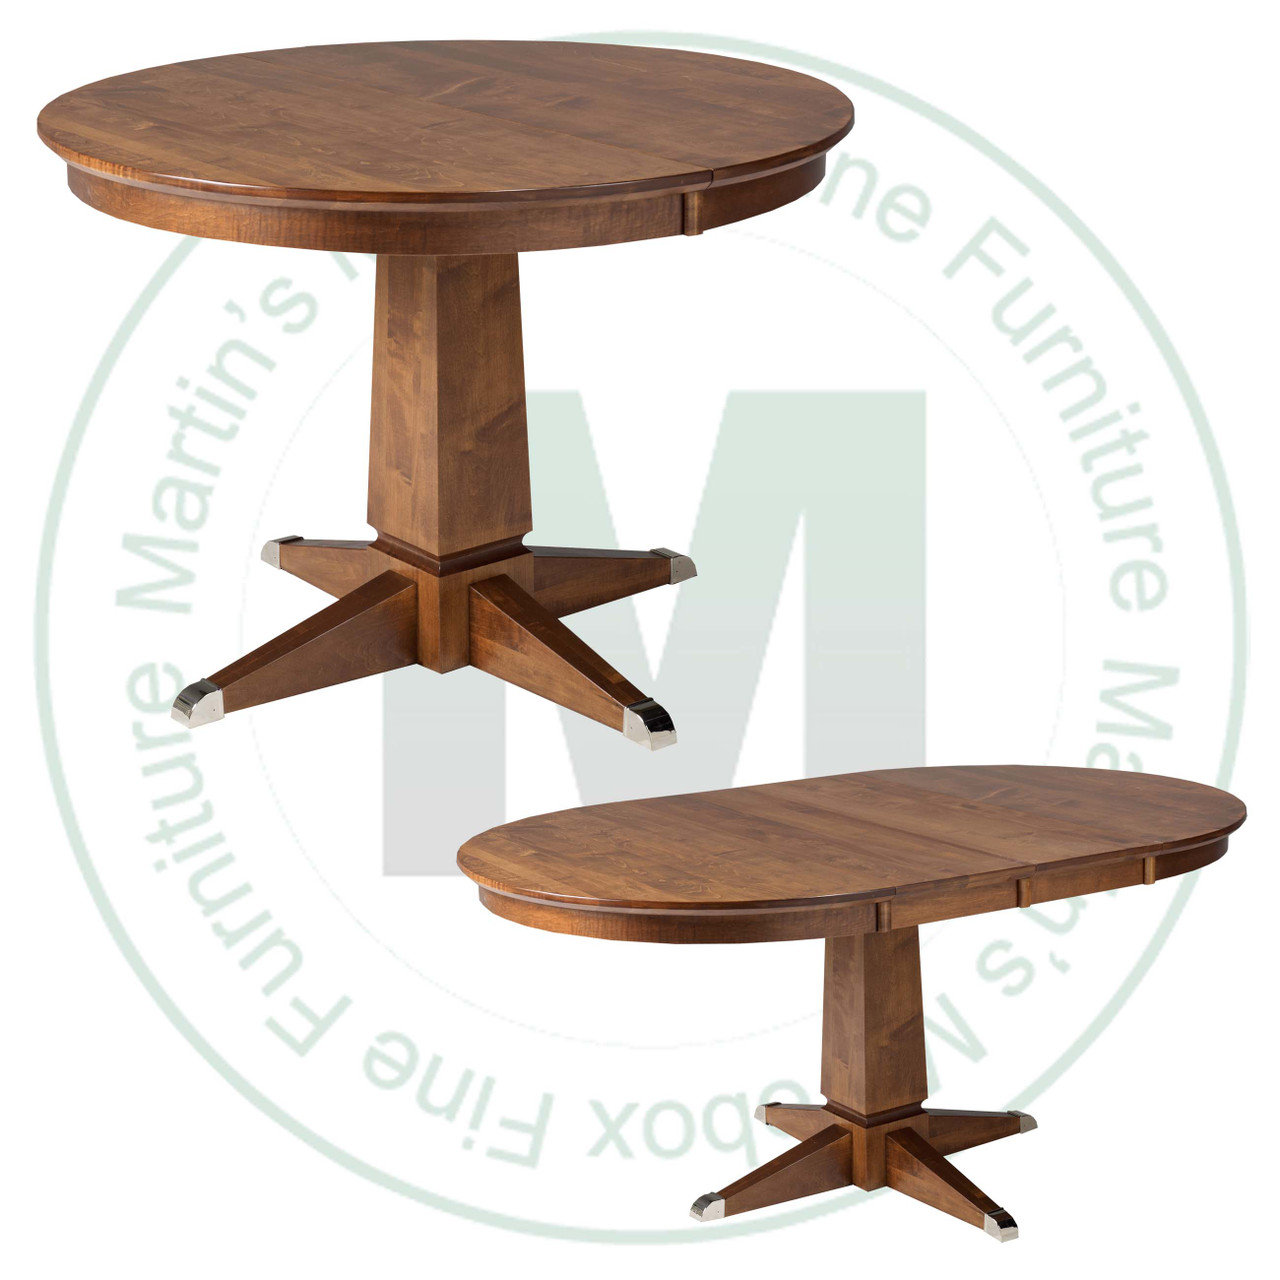 Maple Danish Single Pedestal Table 36''D x 48''W x 30''H With 2 - 12'' Leaves